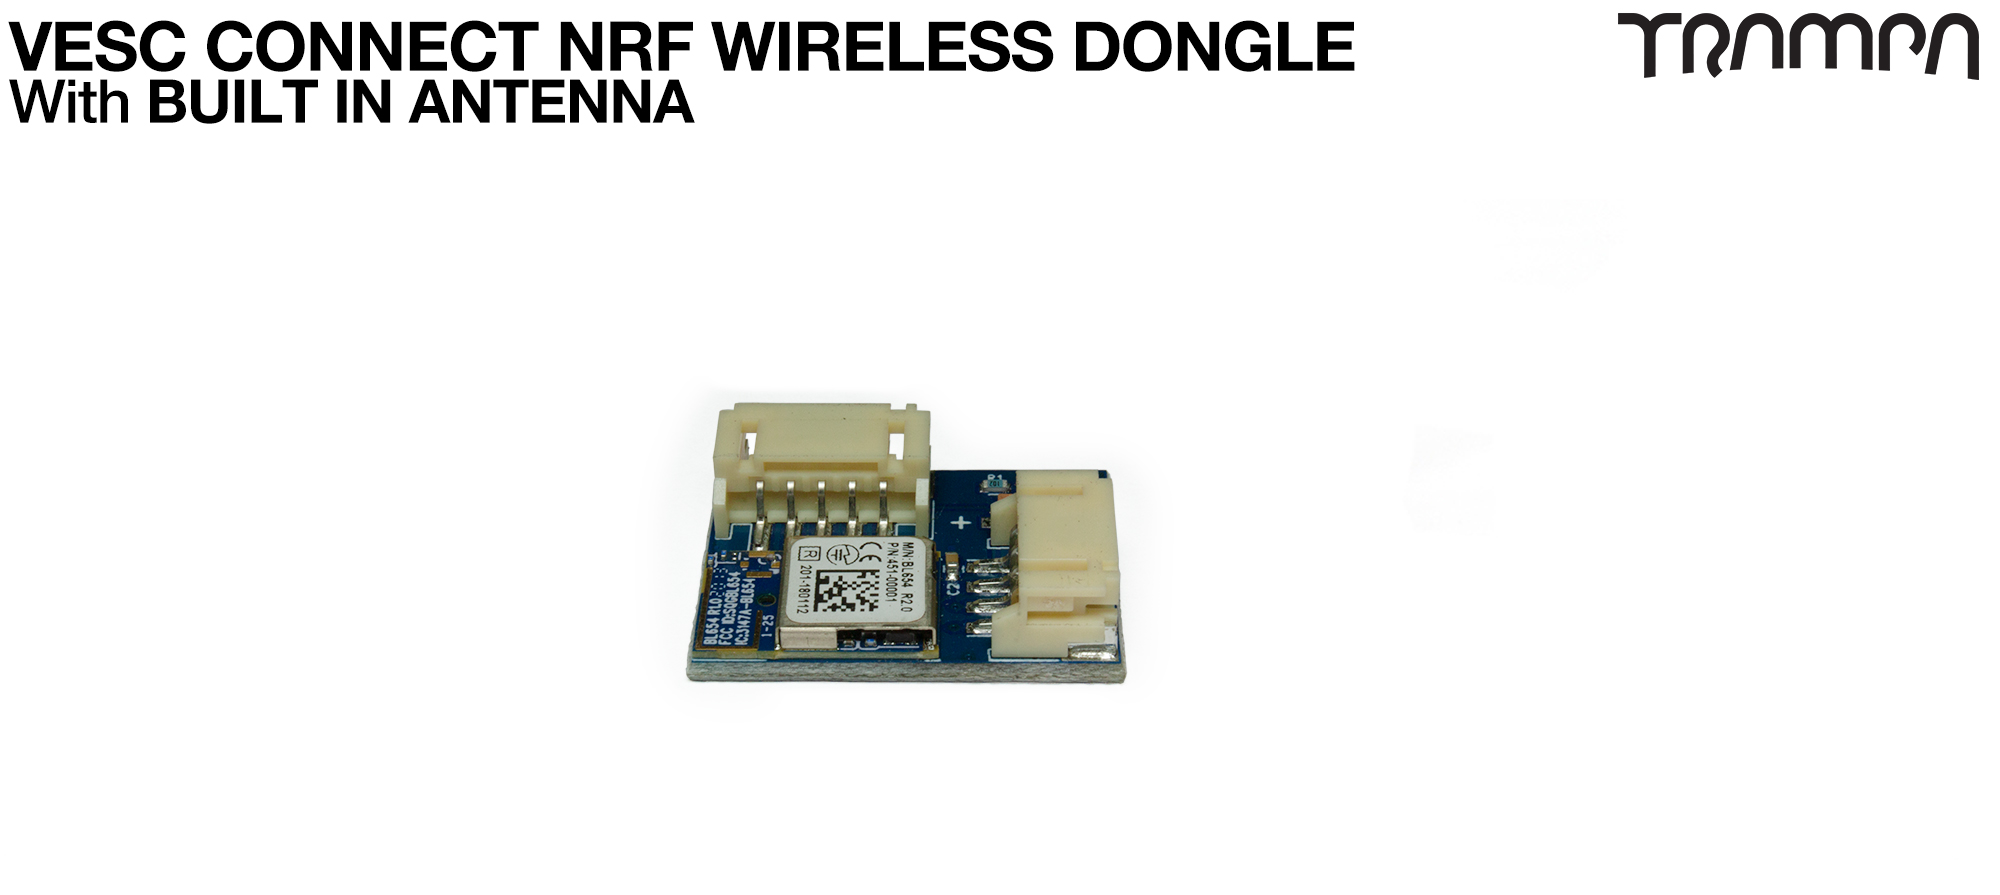 VESC Connect NRF Dongle - INTEGRATED Antenna (+£30)